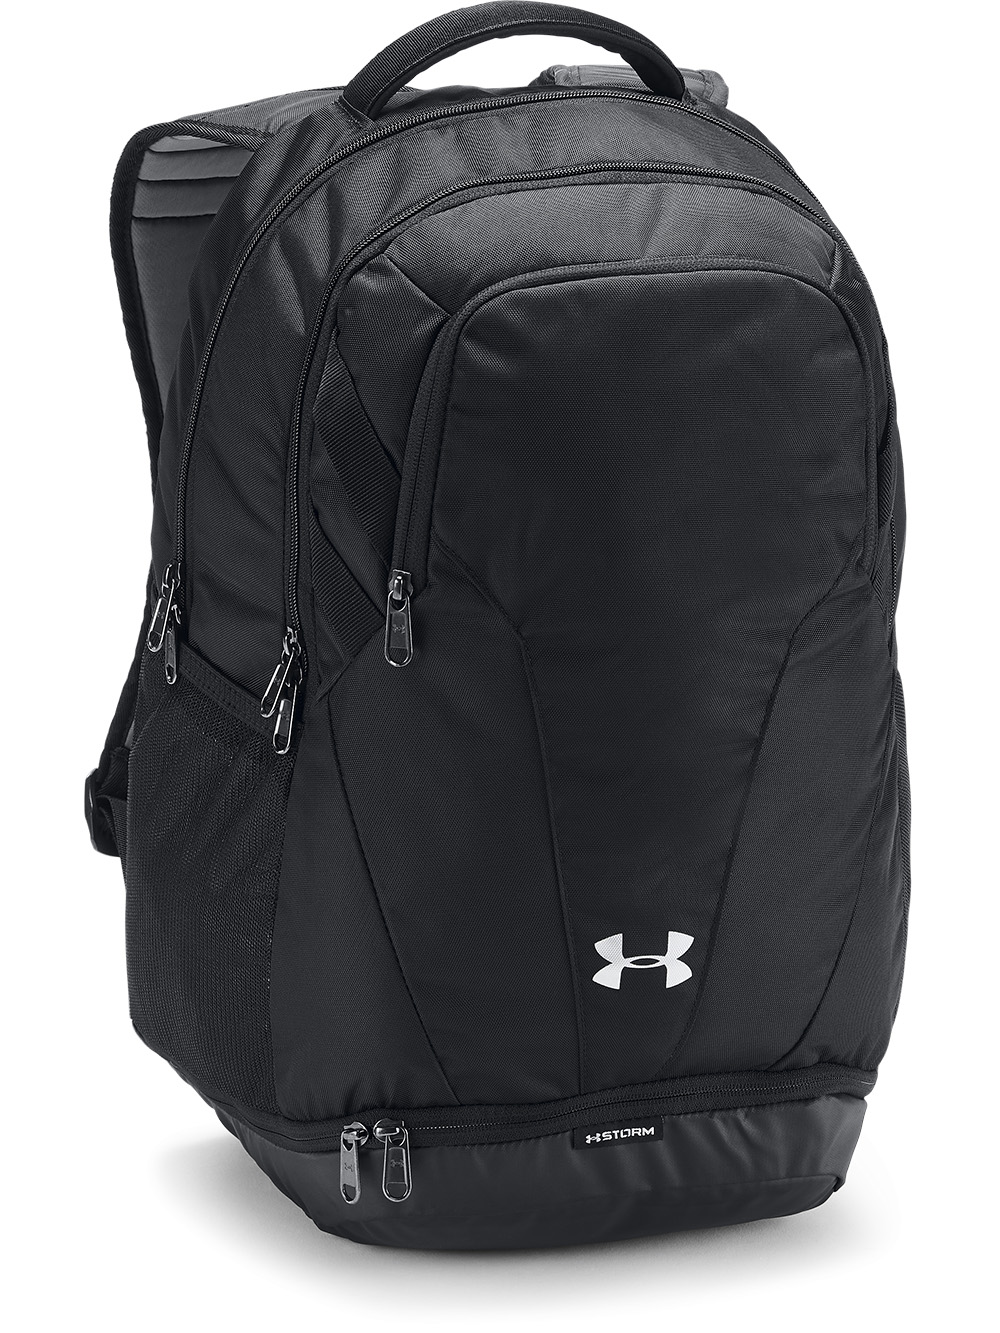 volleyball bags under armour